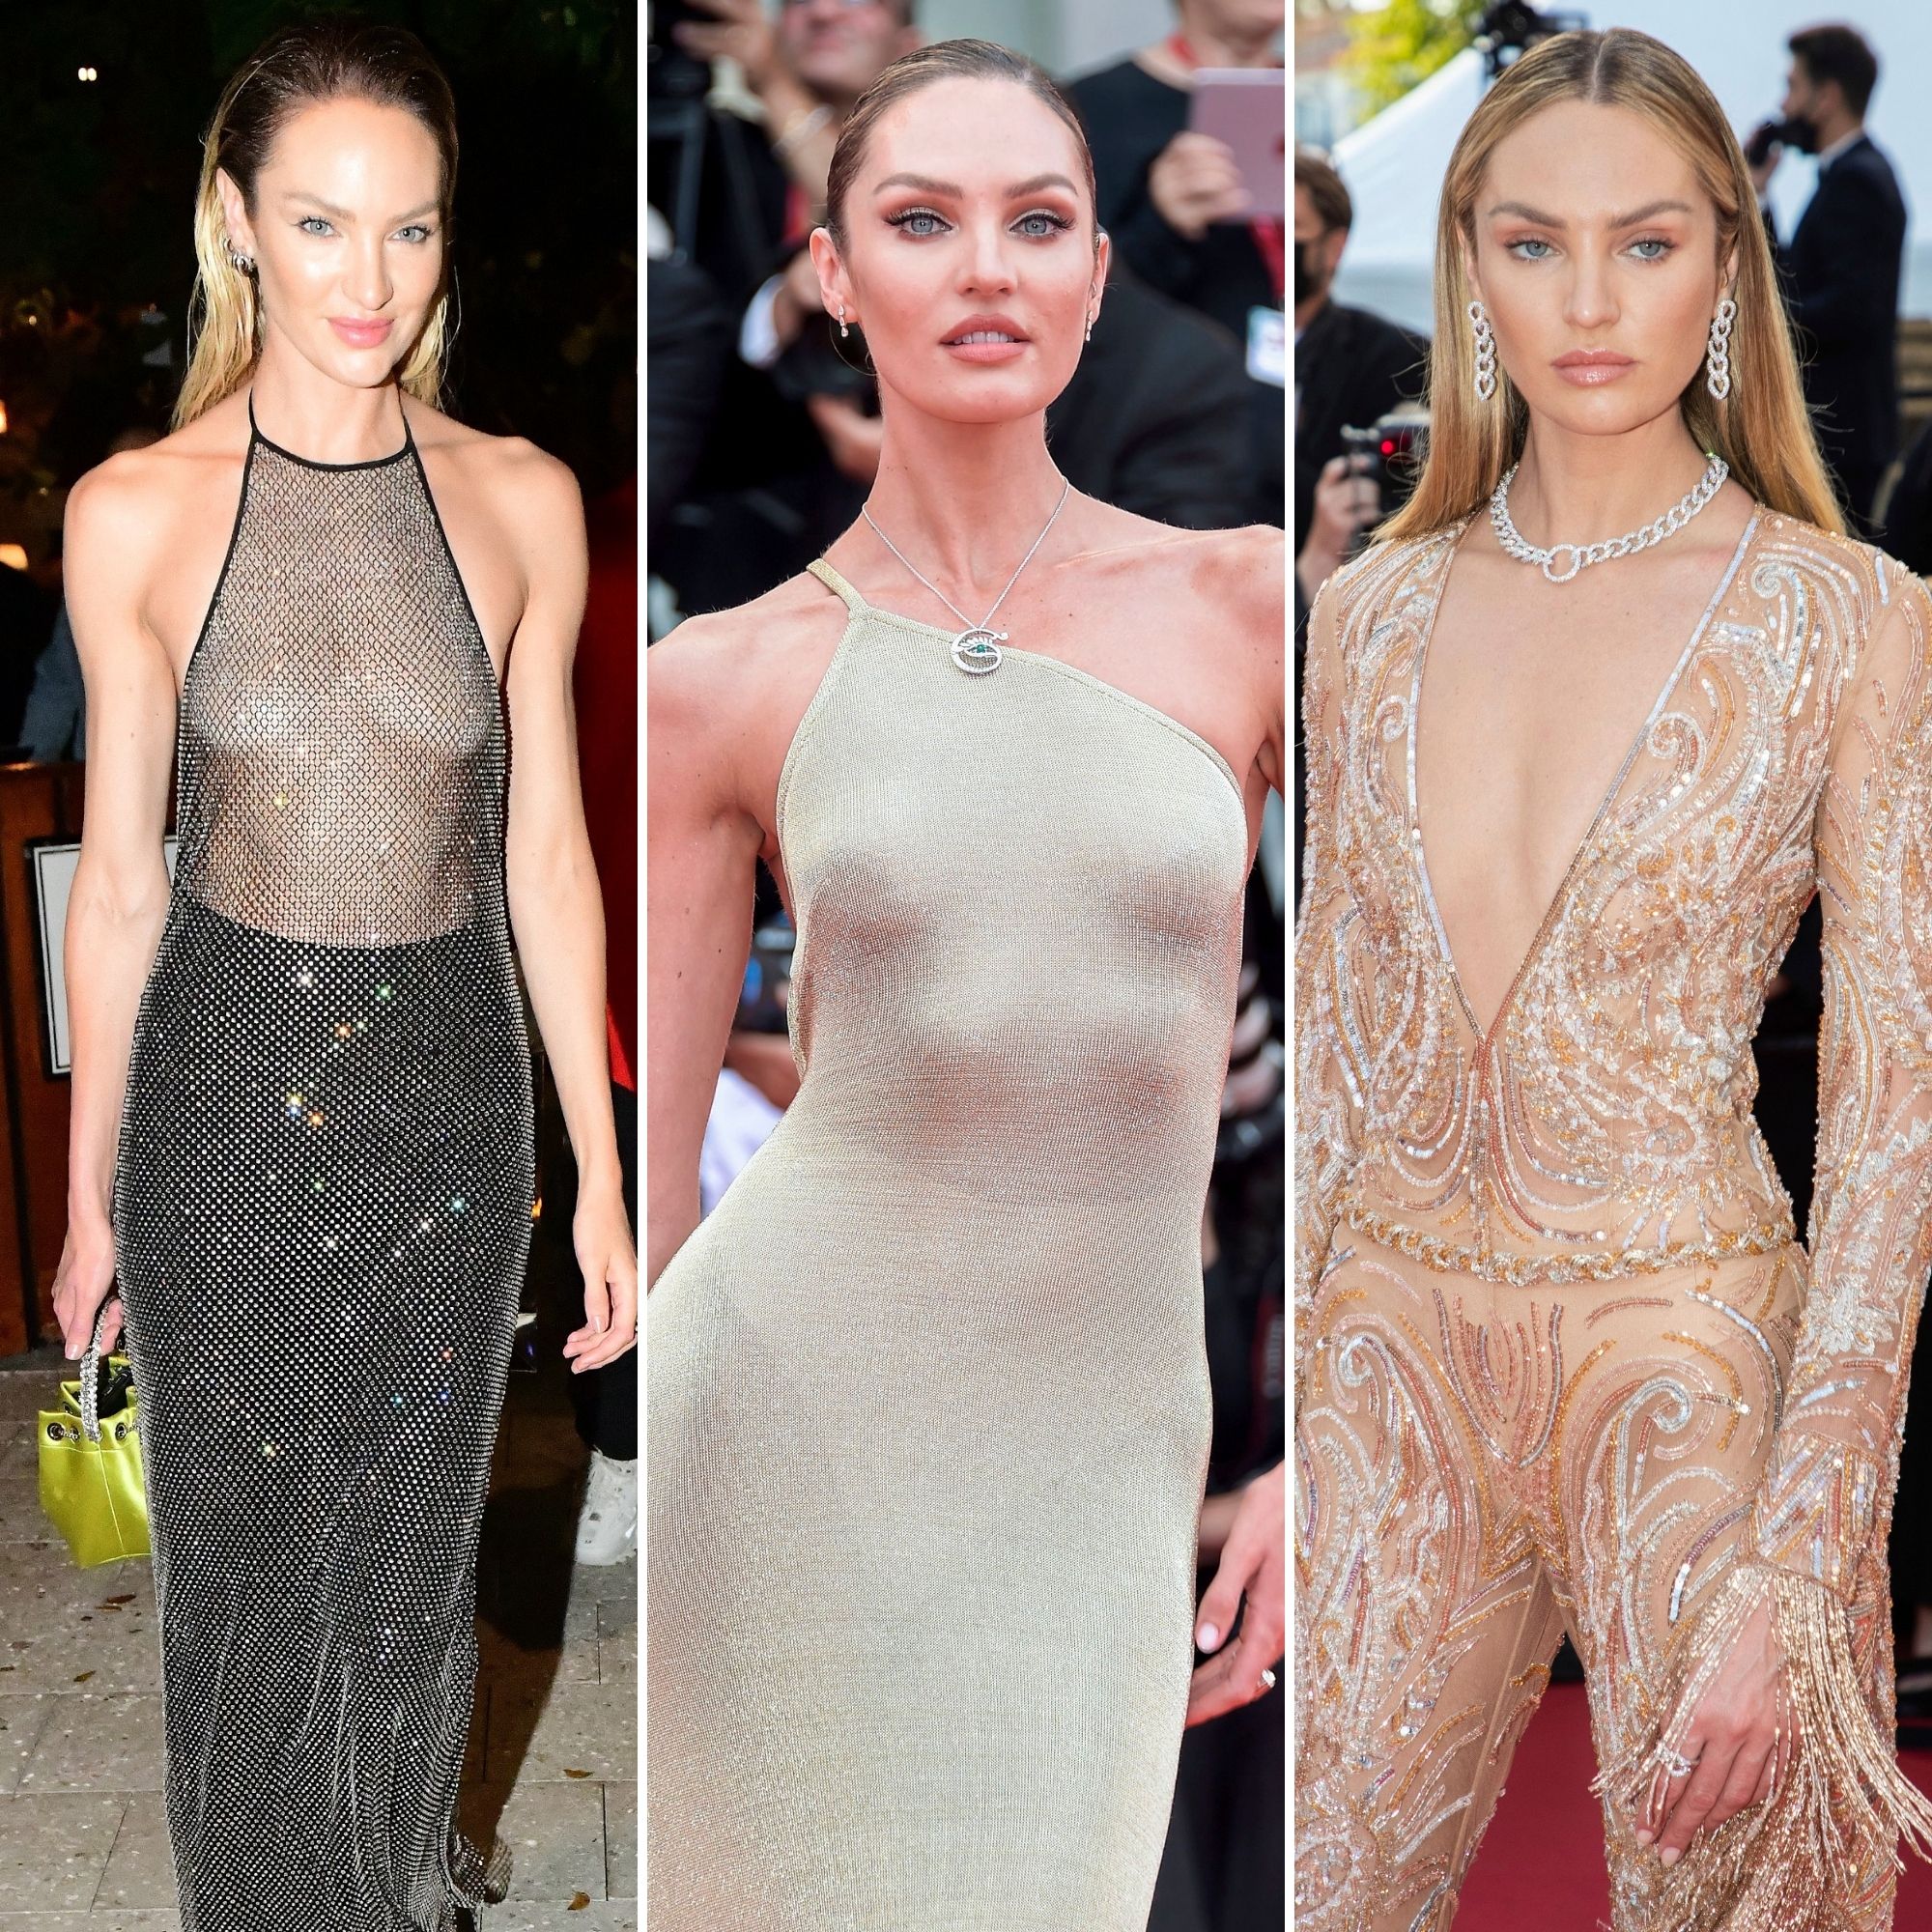 See Candice Swanepoel's Ultra Revealing Low-Cut Dress!